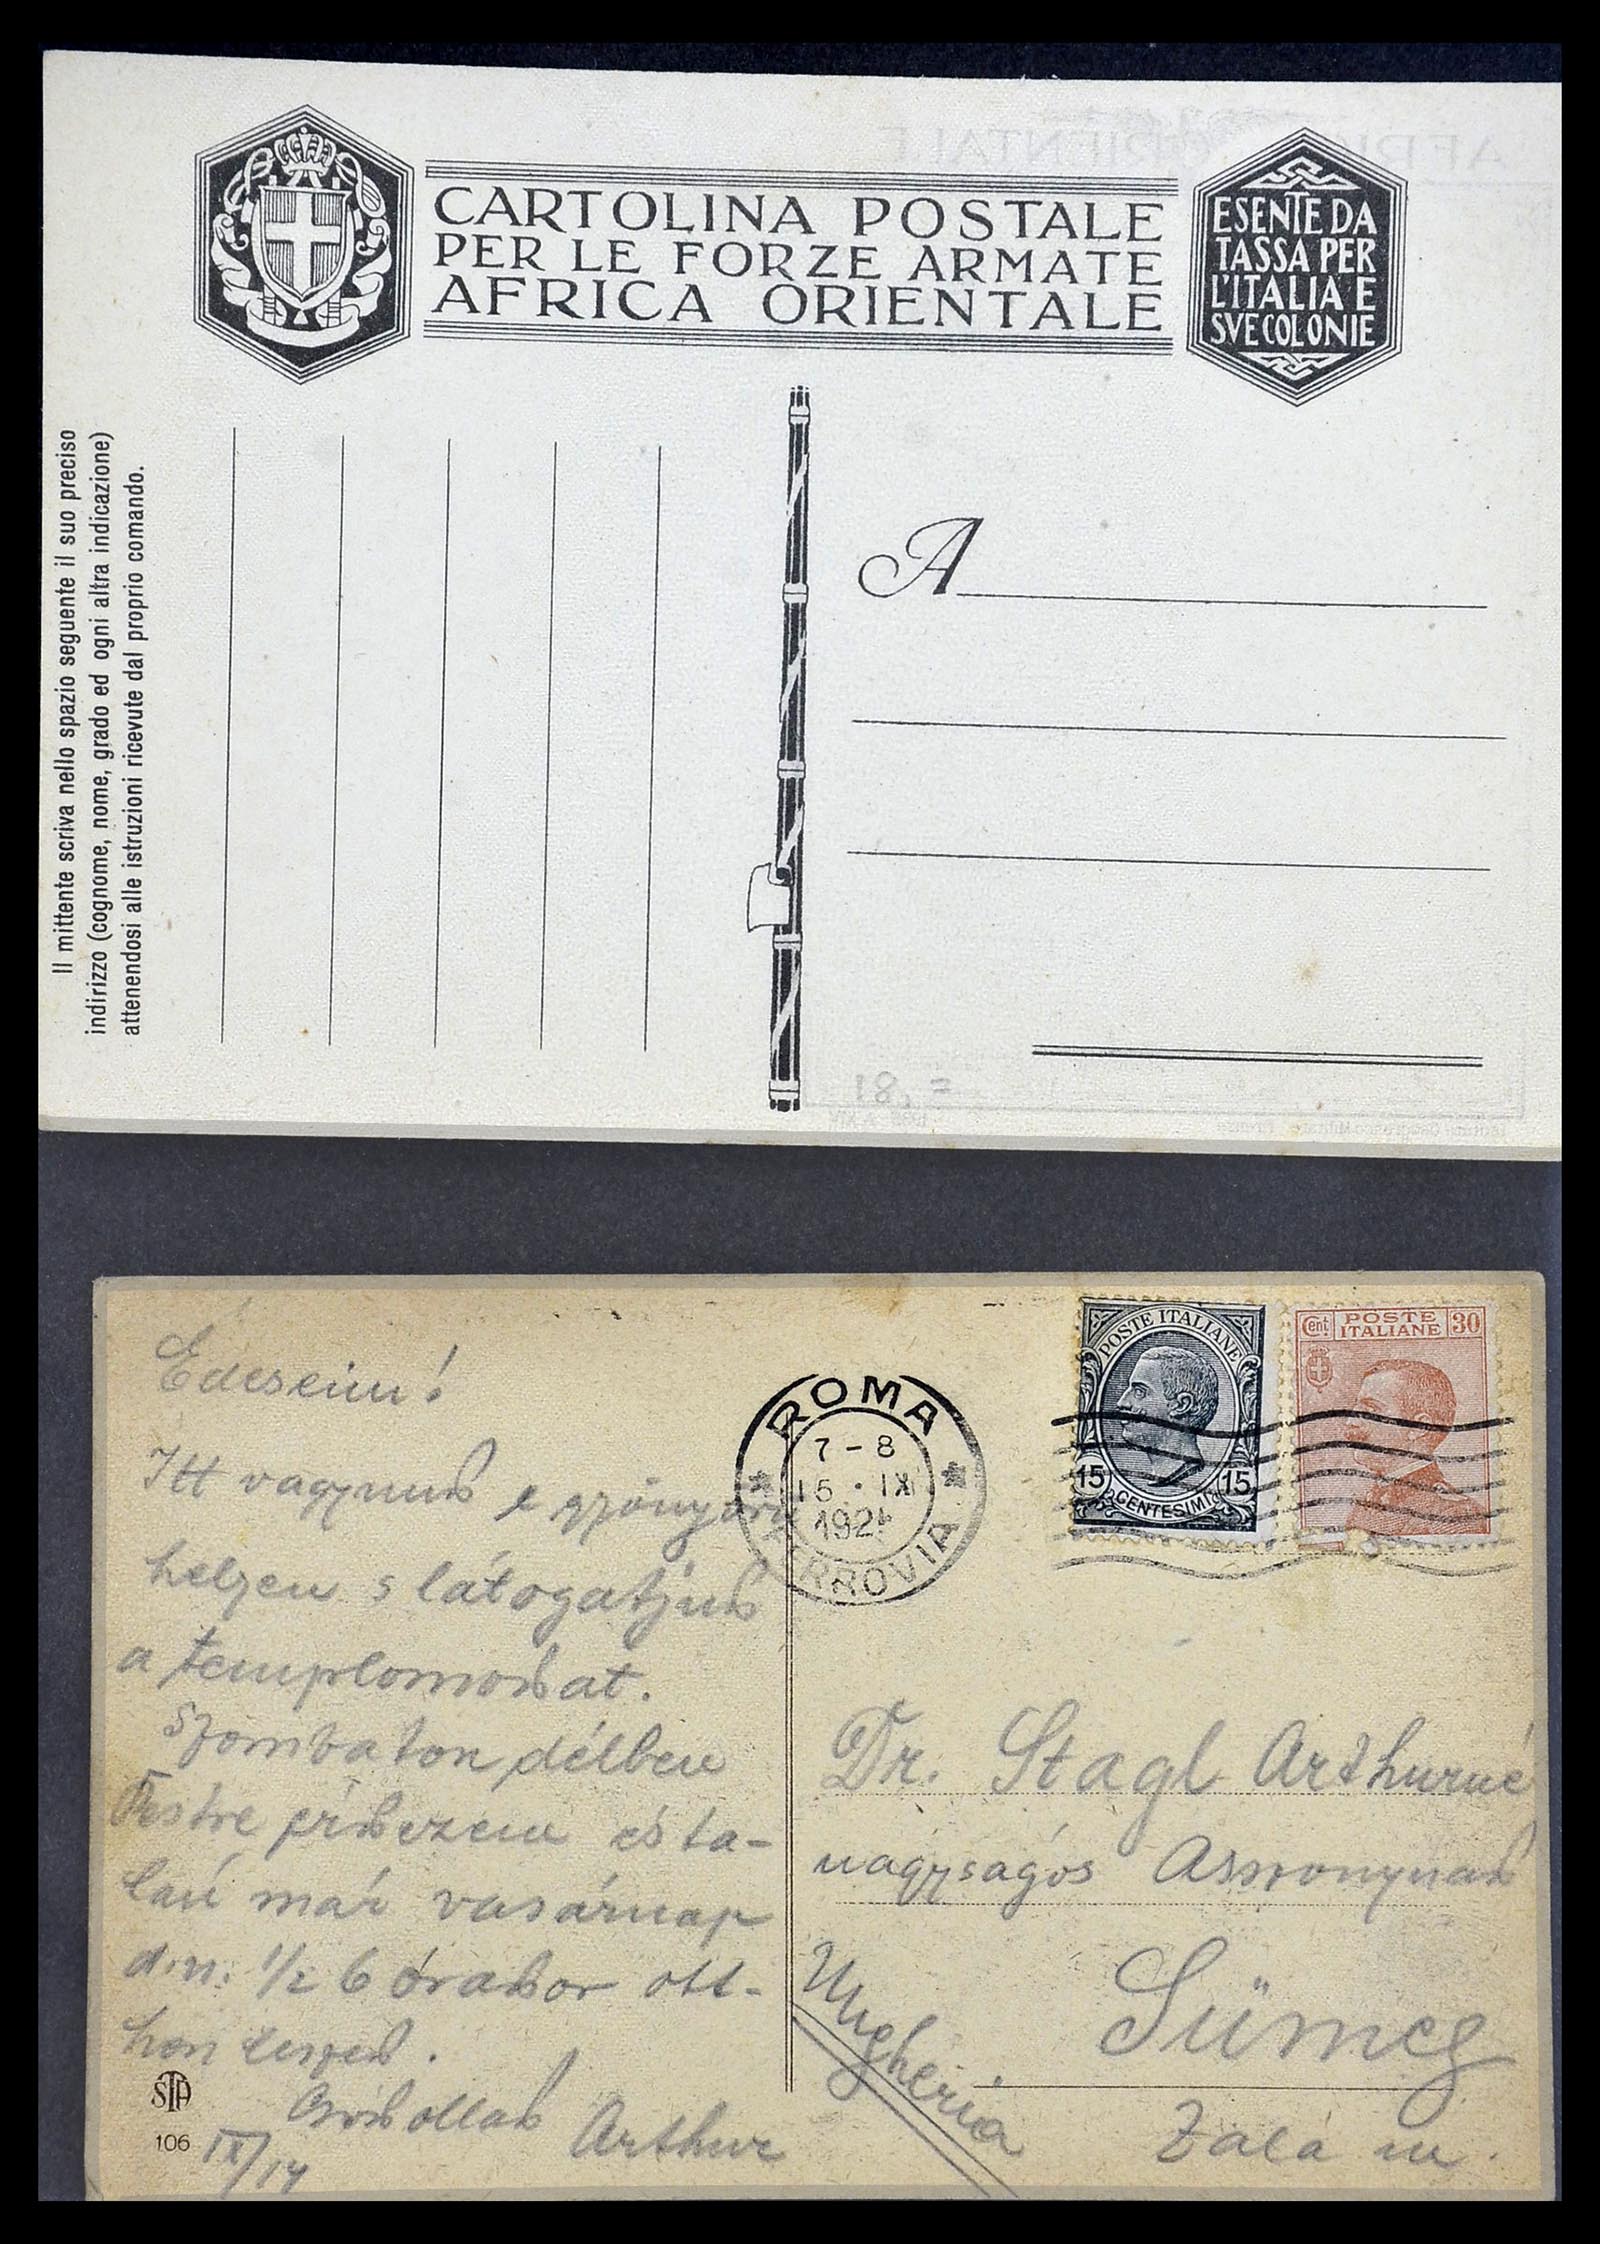 33737 120 - Stamp collection 33737 Italië covers and cards 1856-1945.